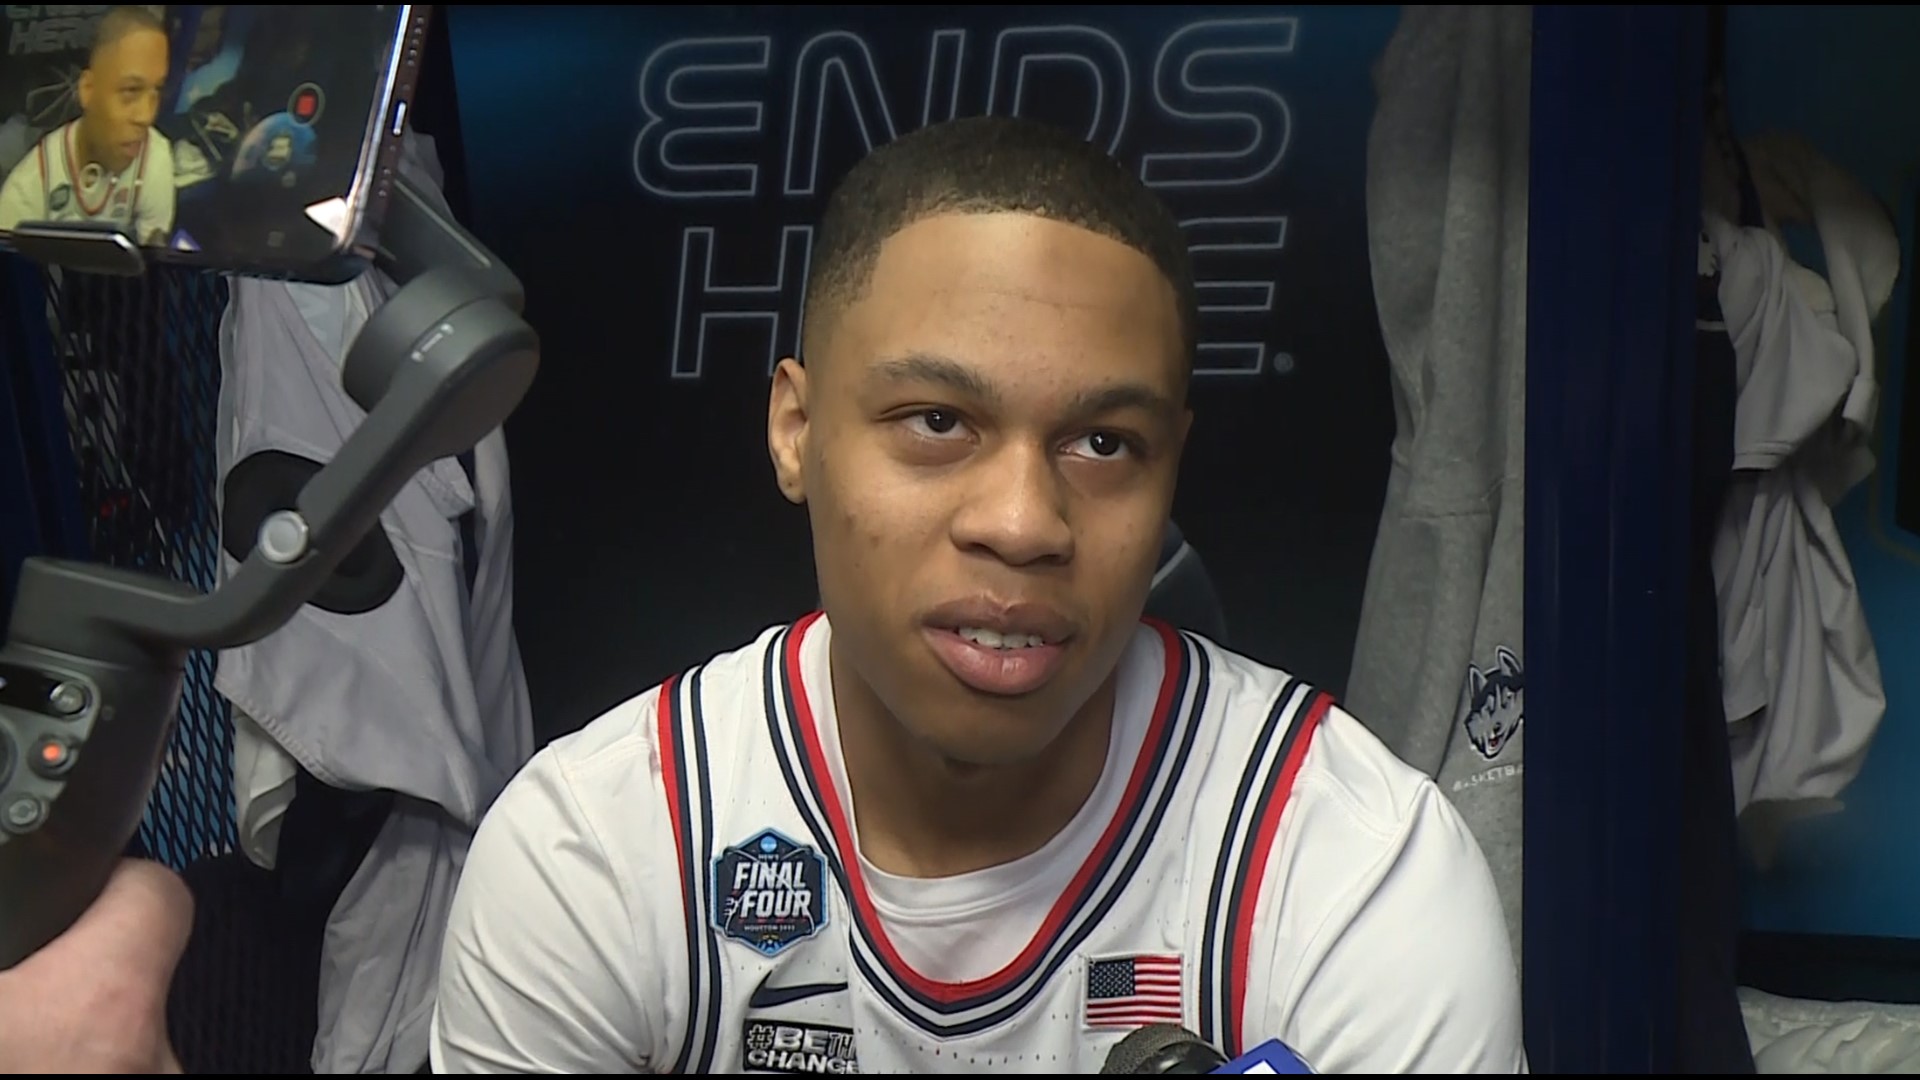 Hawkins was questionable to play for the Huskies as he was battling an illness before the game, but he played throughout scoring 13 points in 25 minutes.